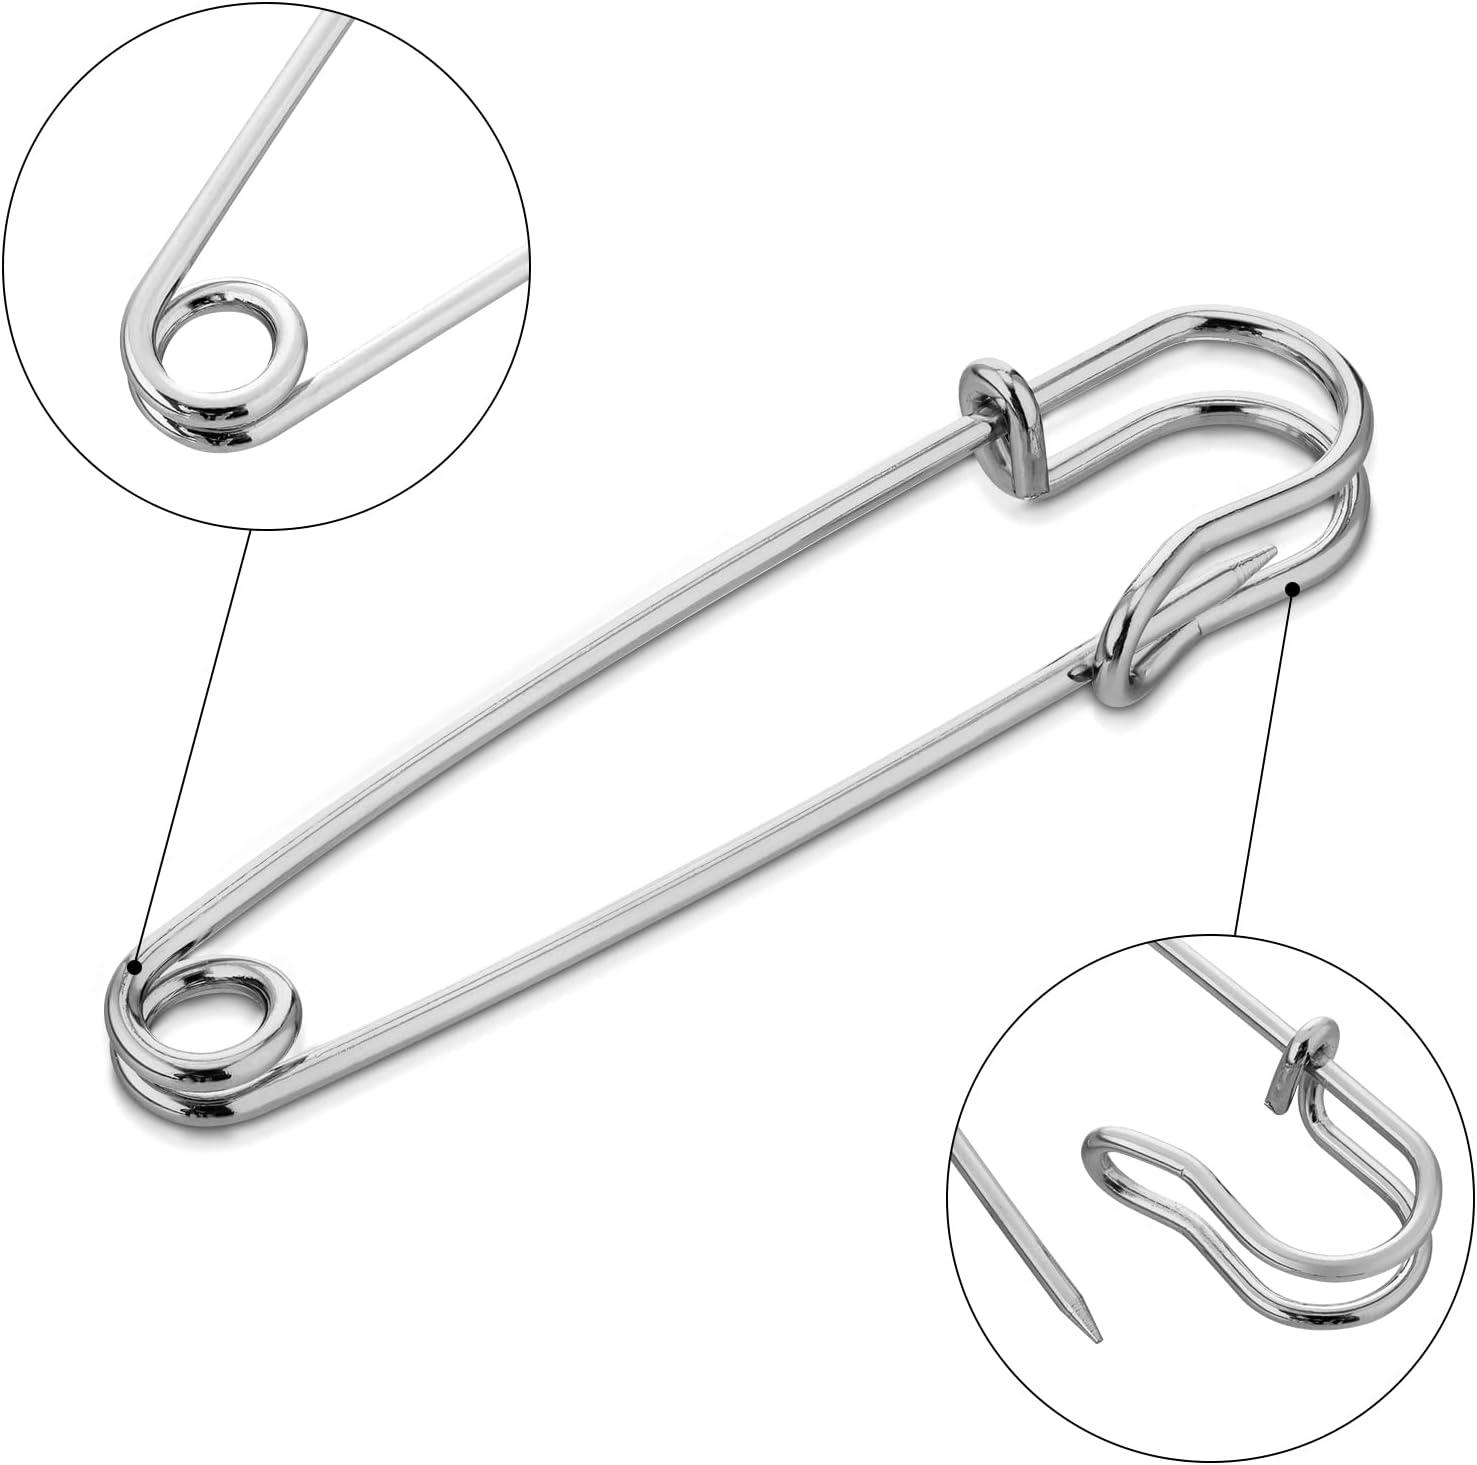 Giant Safety Pin